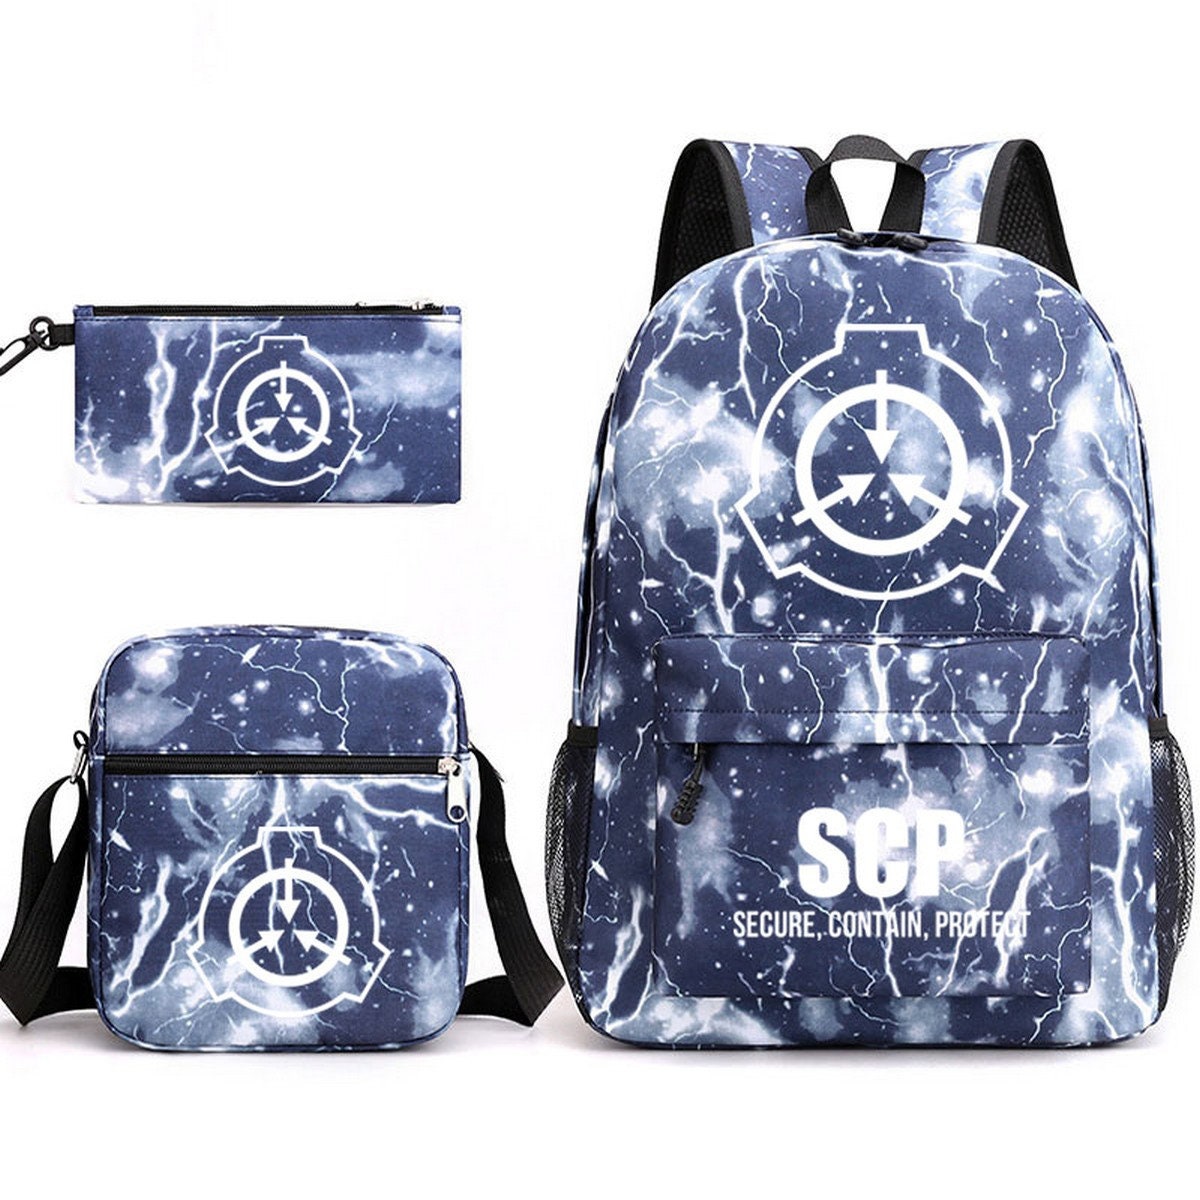 Scp Bags for Sale